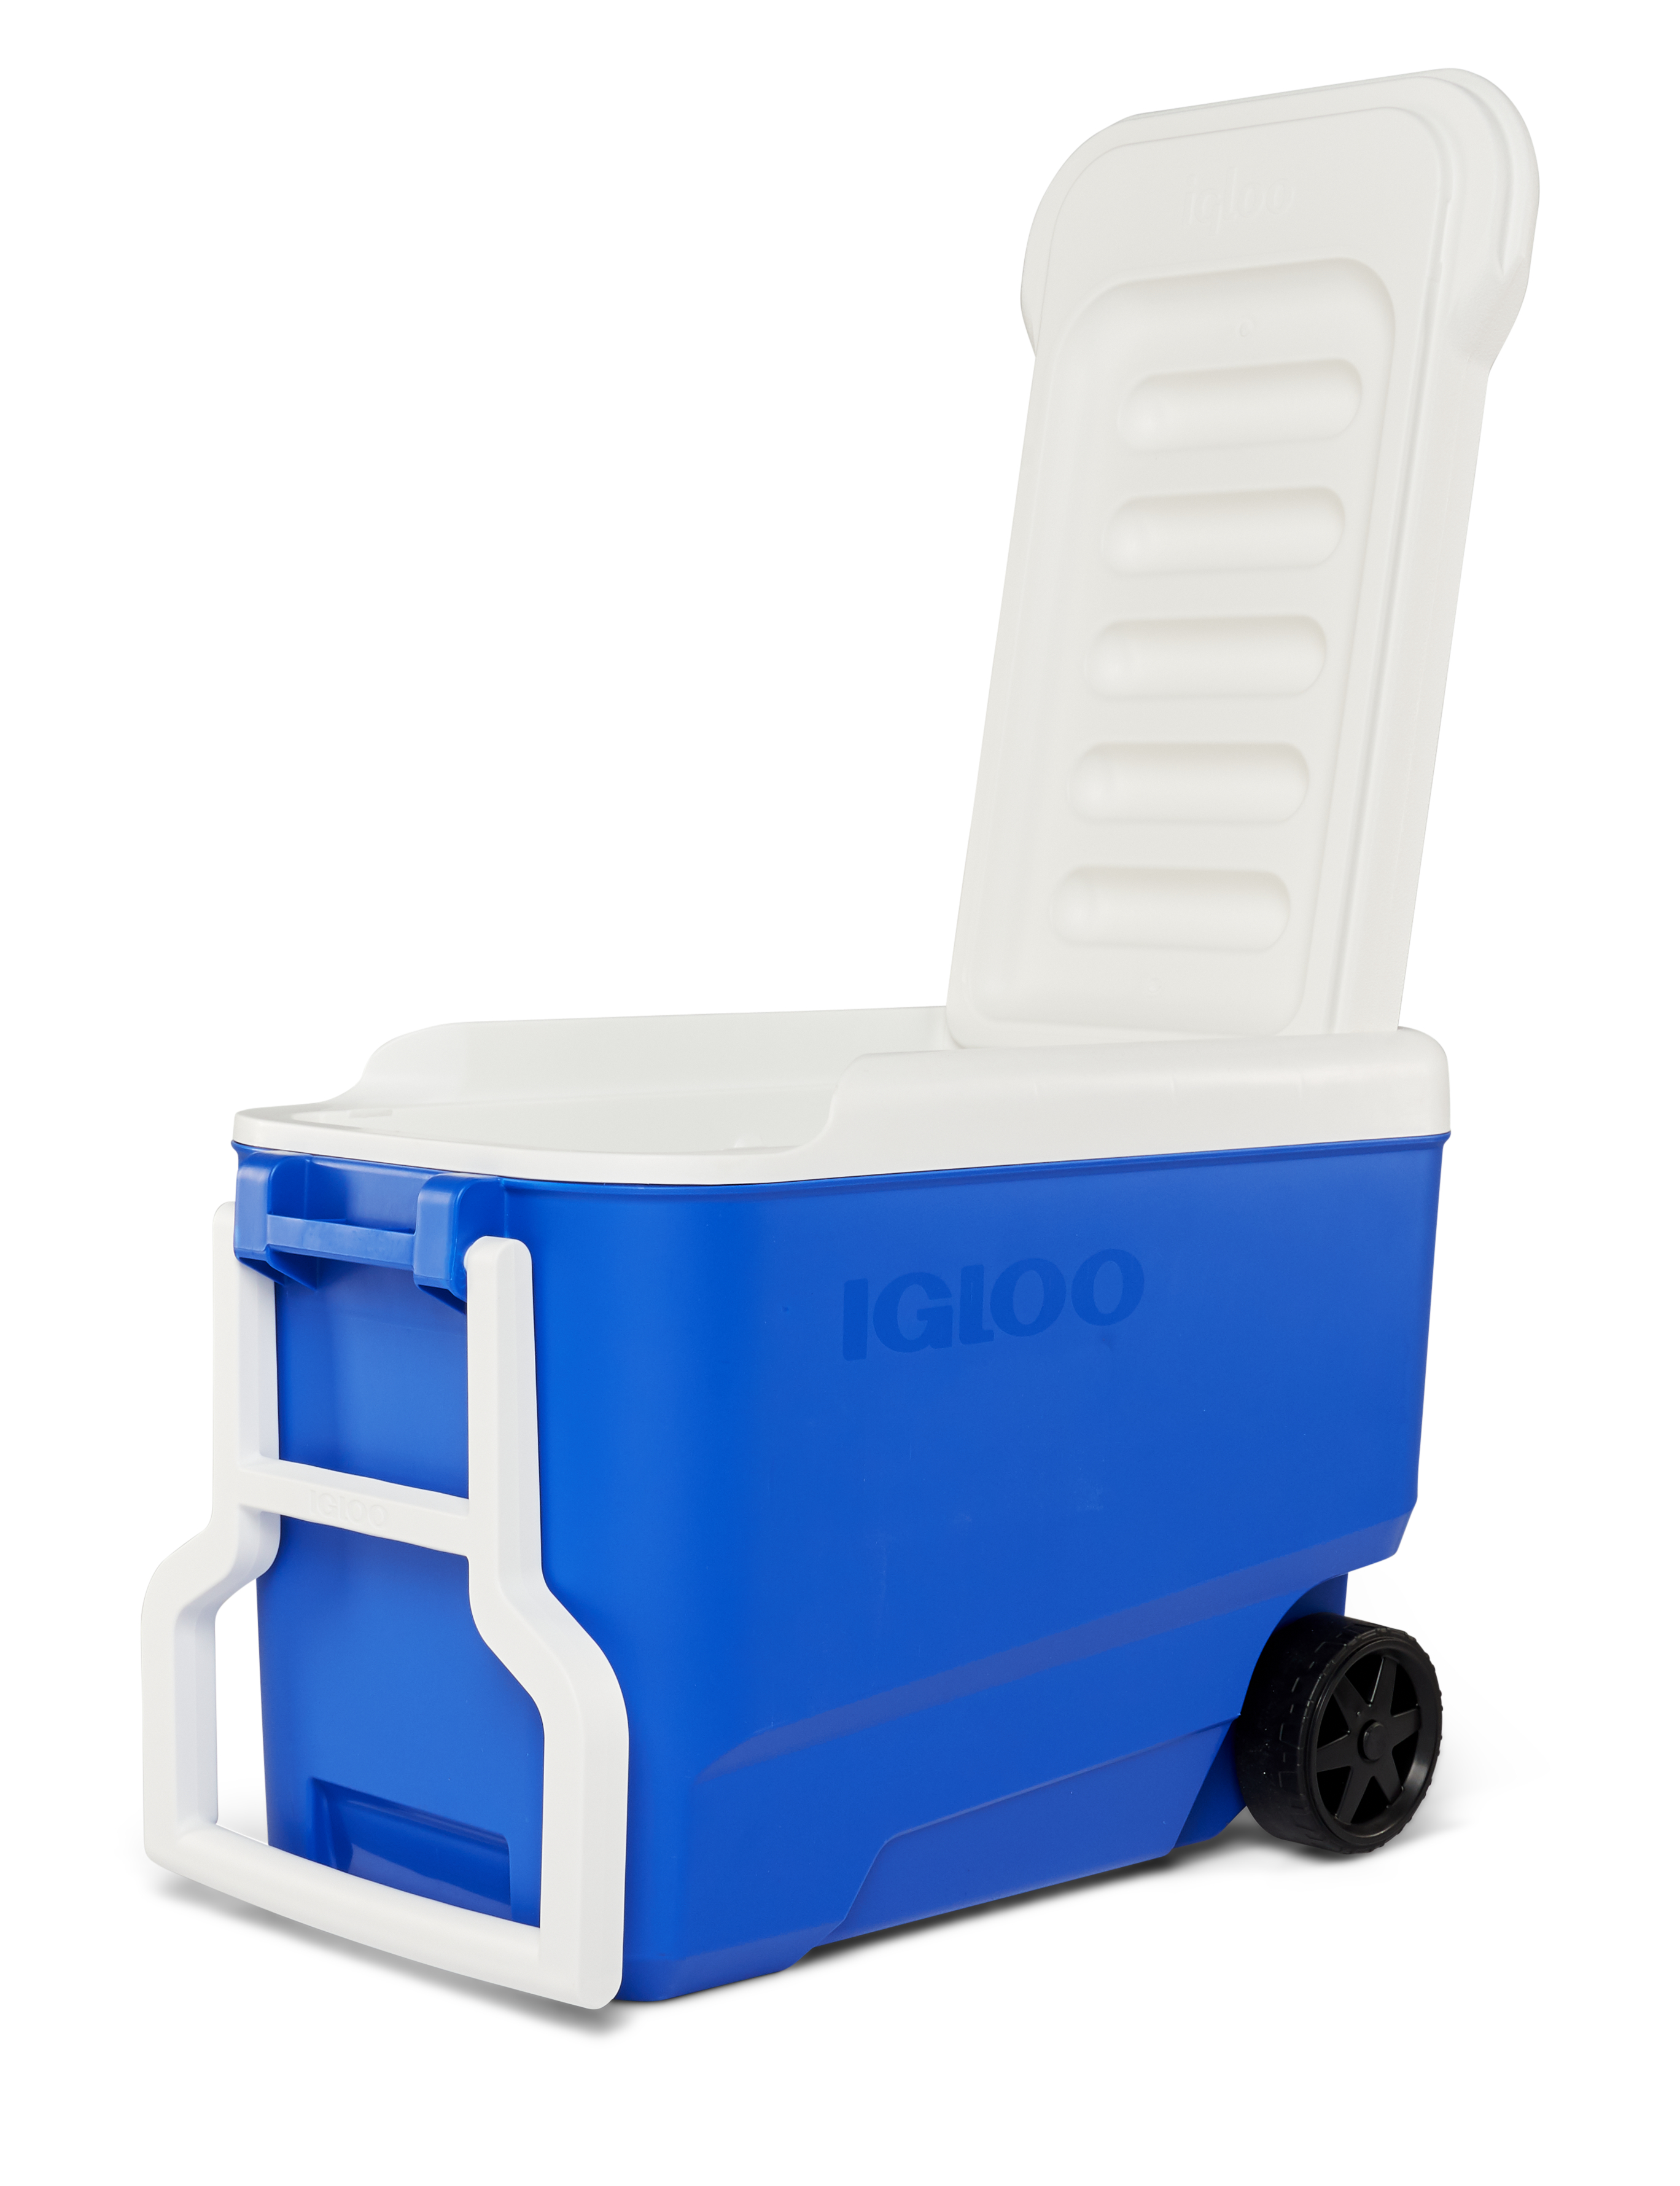 Igloo 38 QT. Hard-Sided Ice Chest Cooler with Wheels, Blue - image 2 of 11